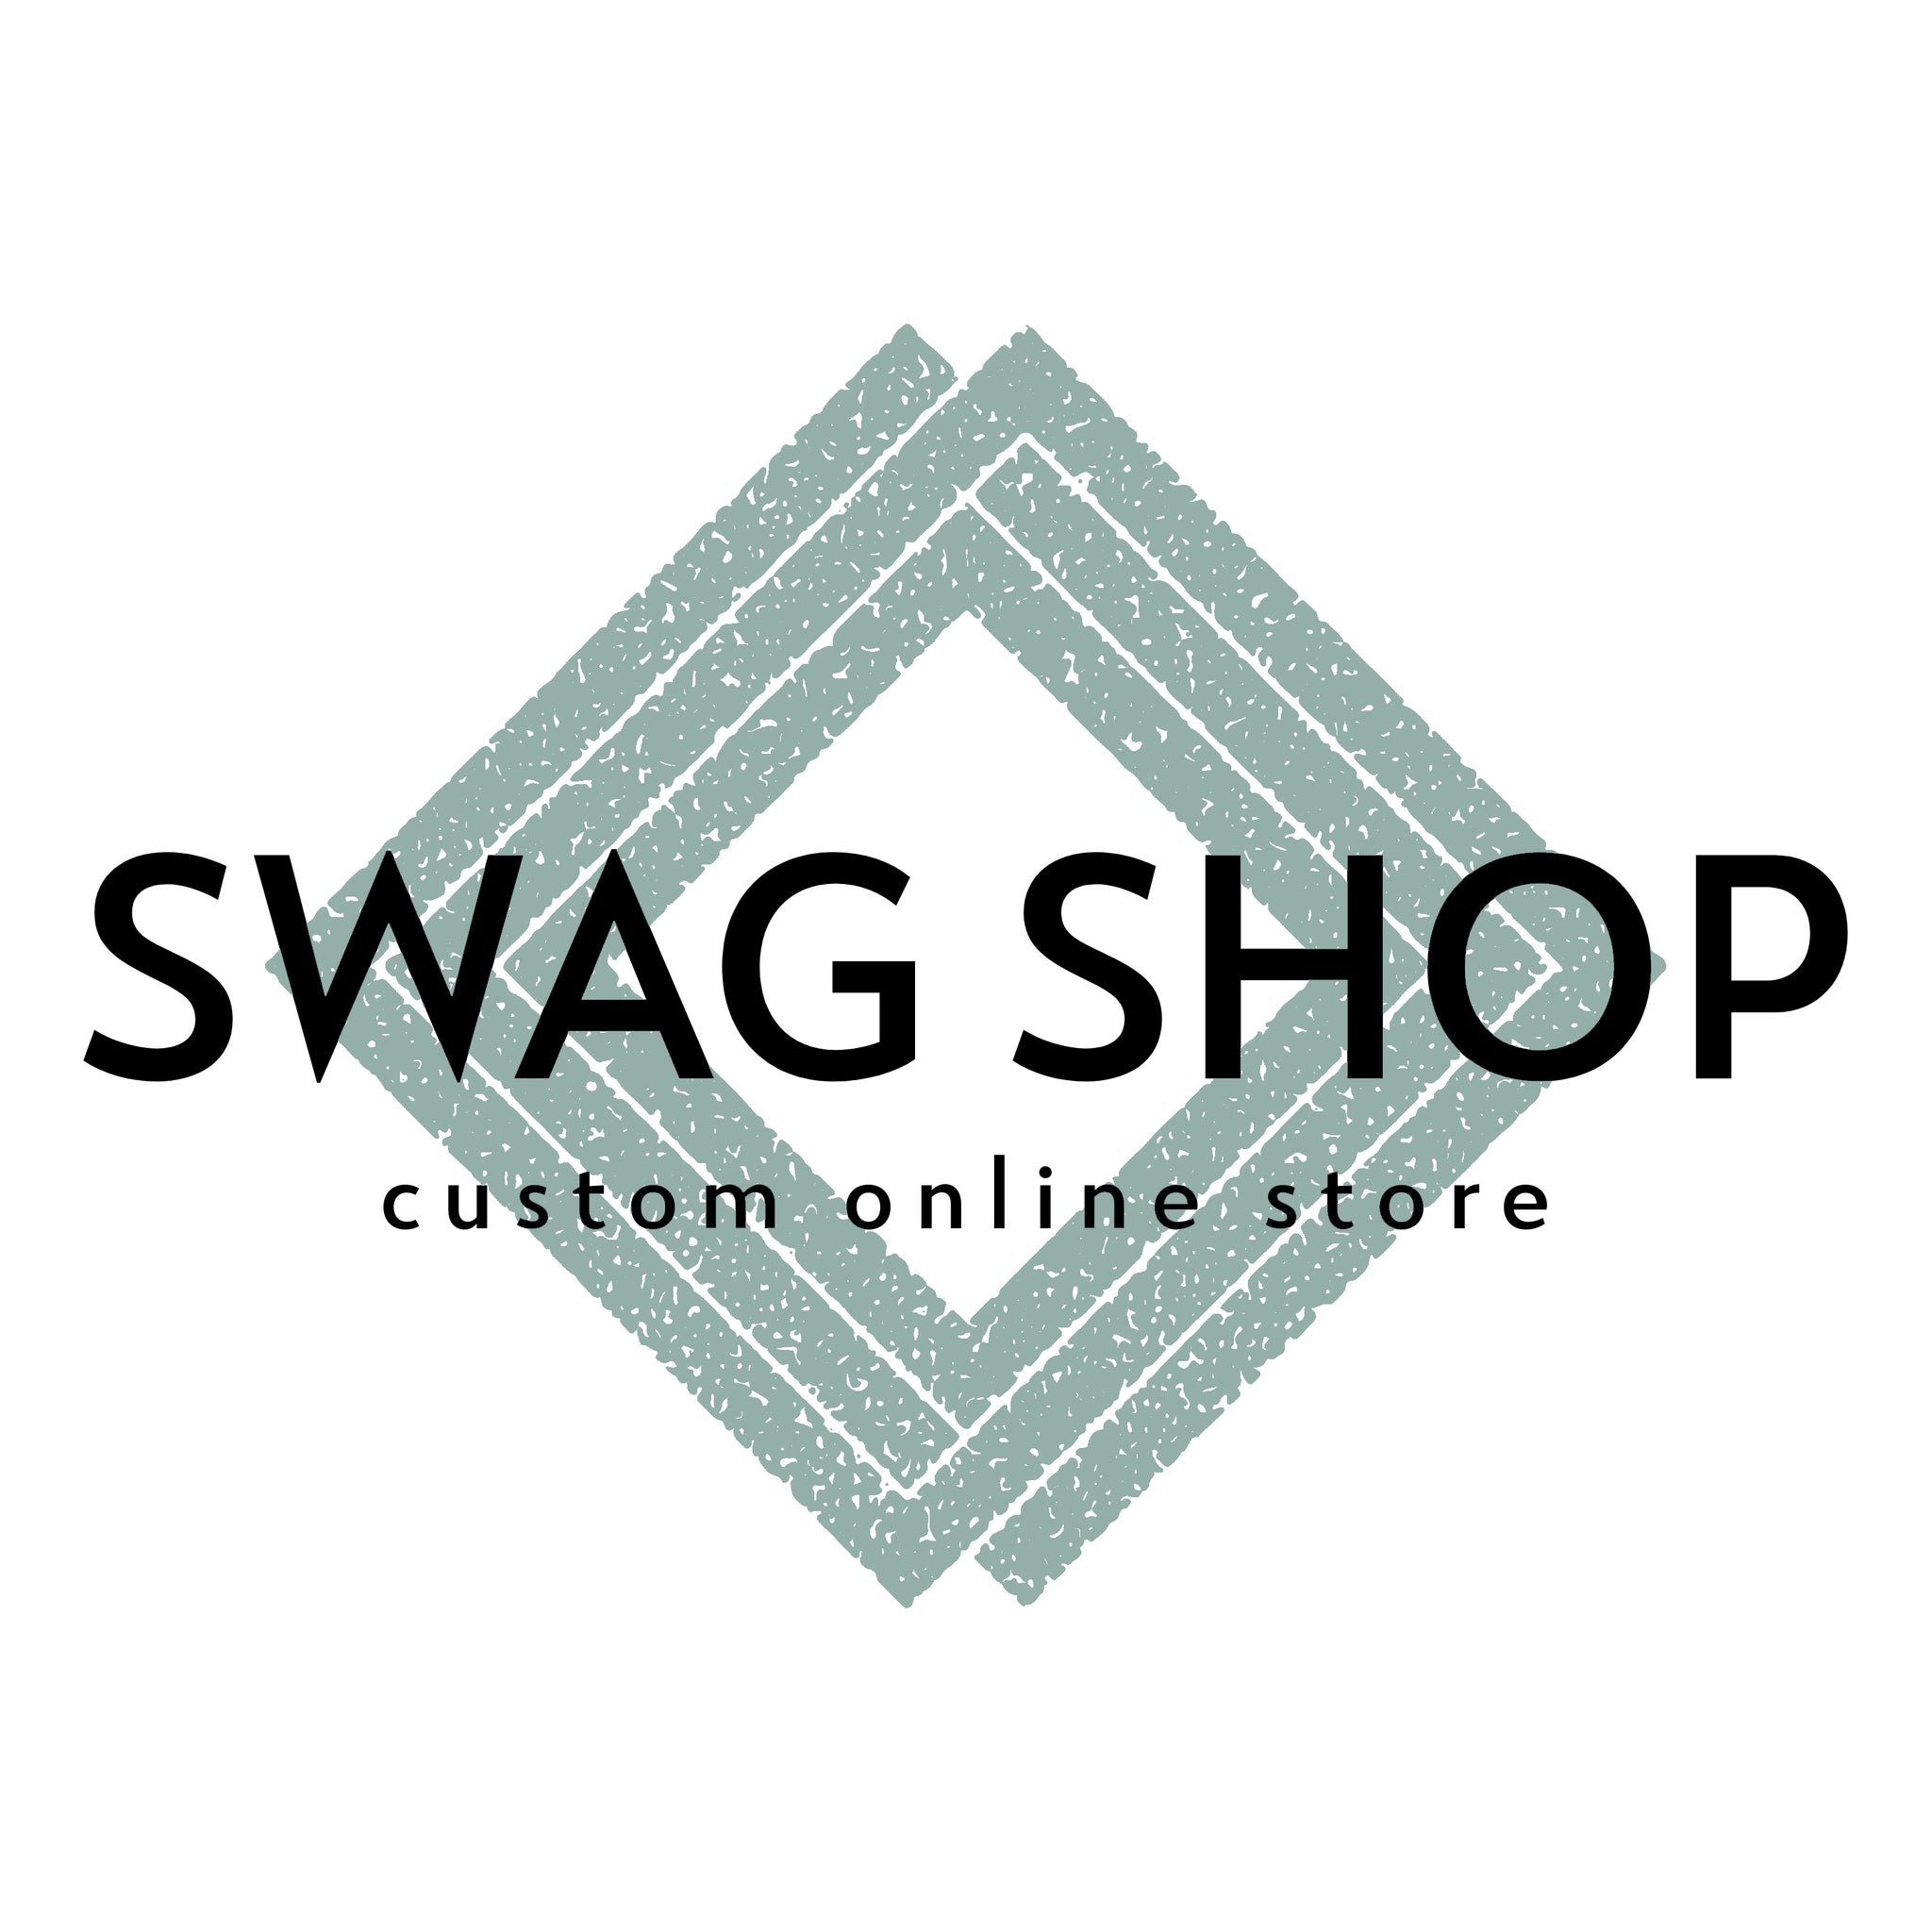 Swag Shop - Small Business - Hosting